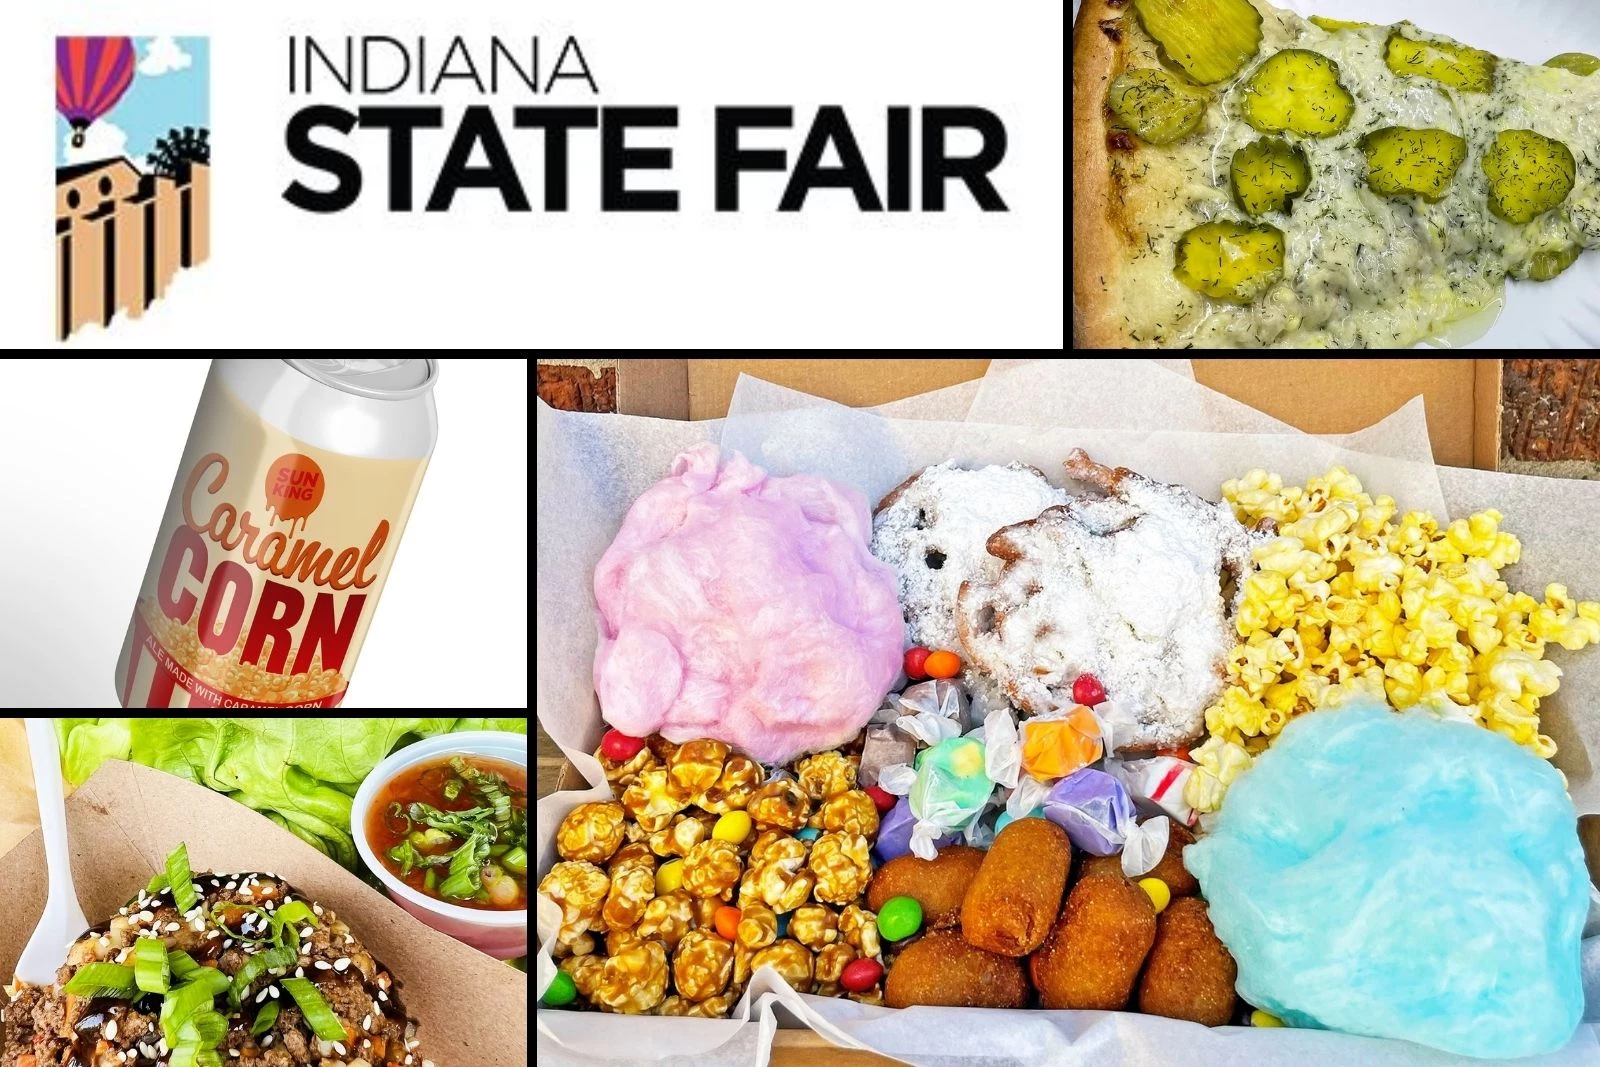 Indiana State Fair Coming August 4th